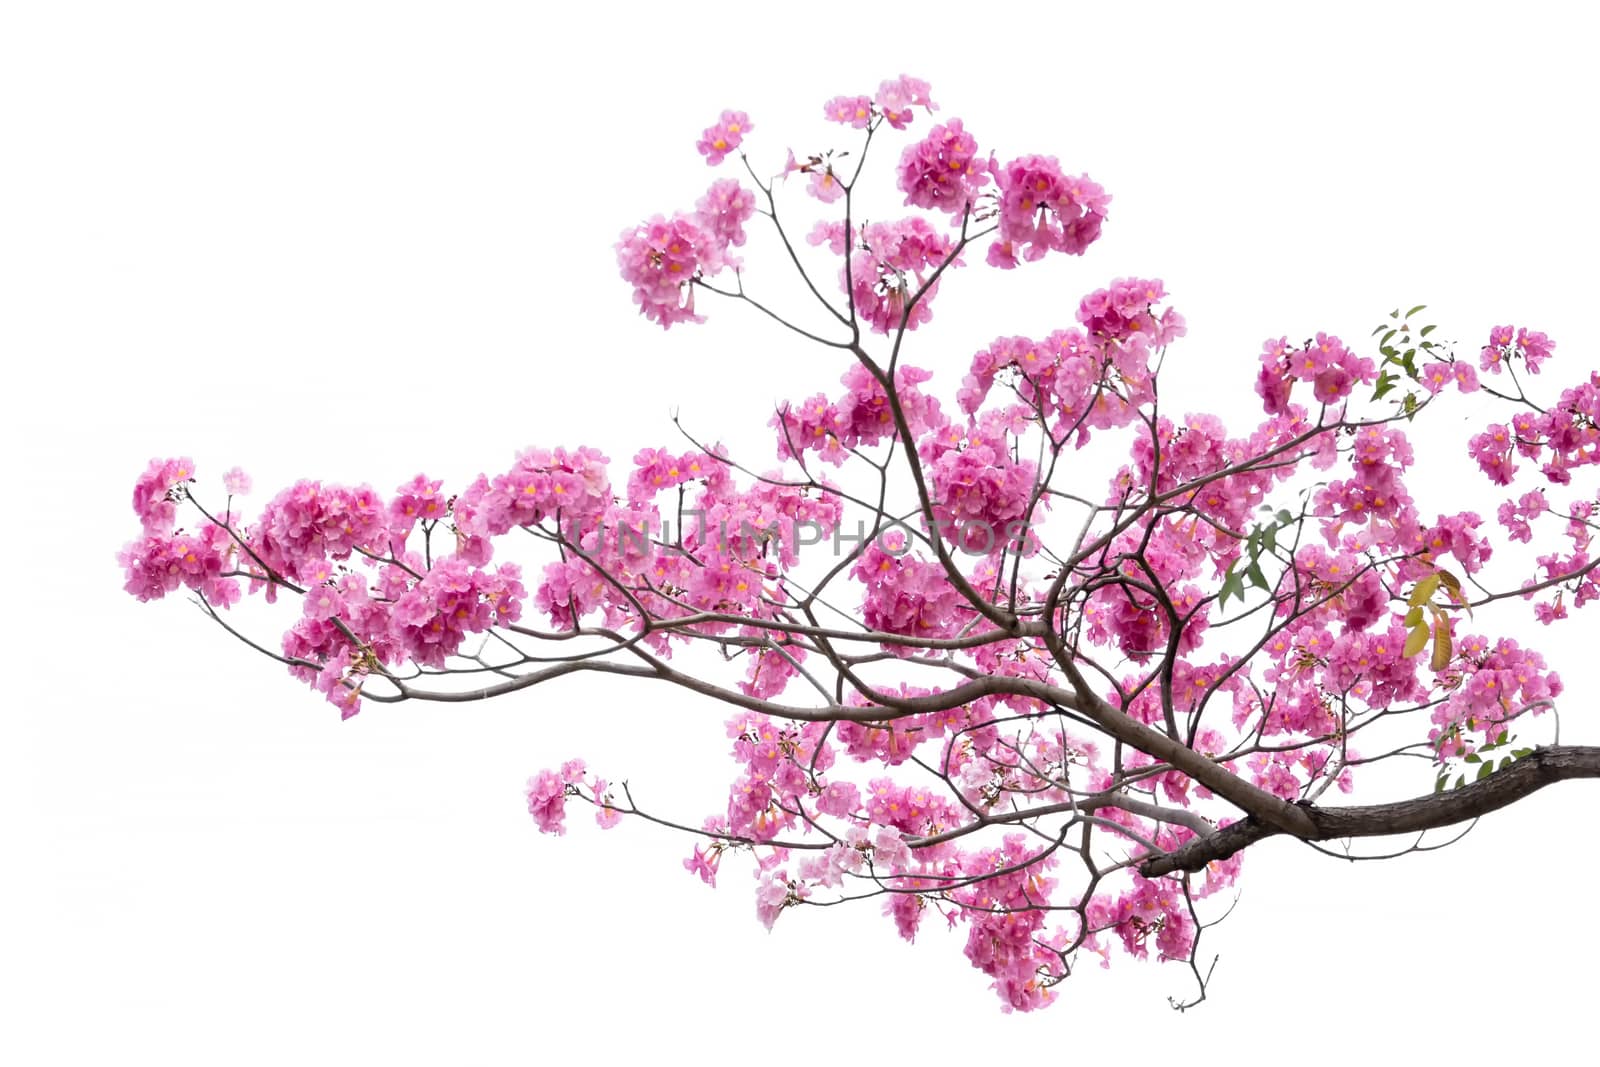 Pink flower and tree branch isolated on white background by DucksmallFoto